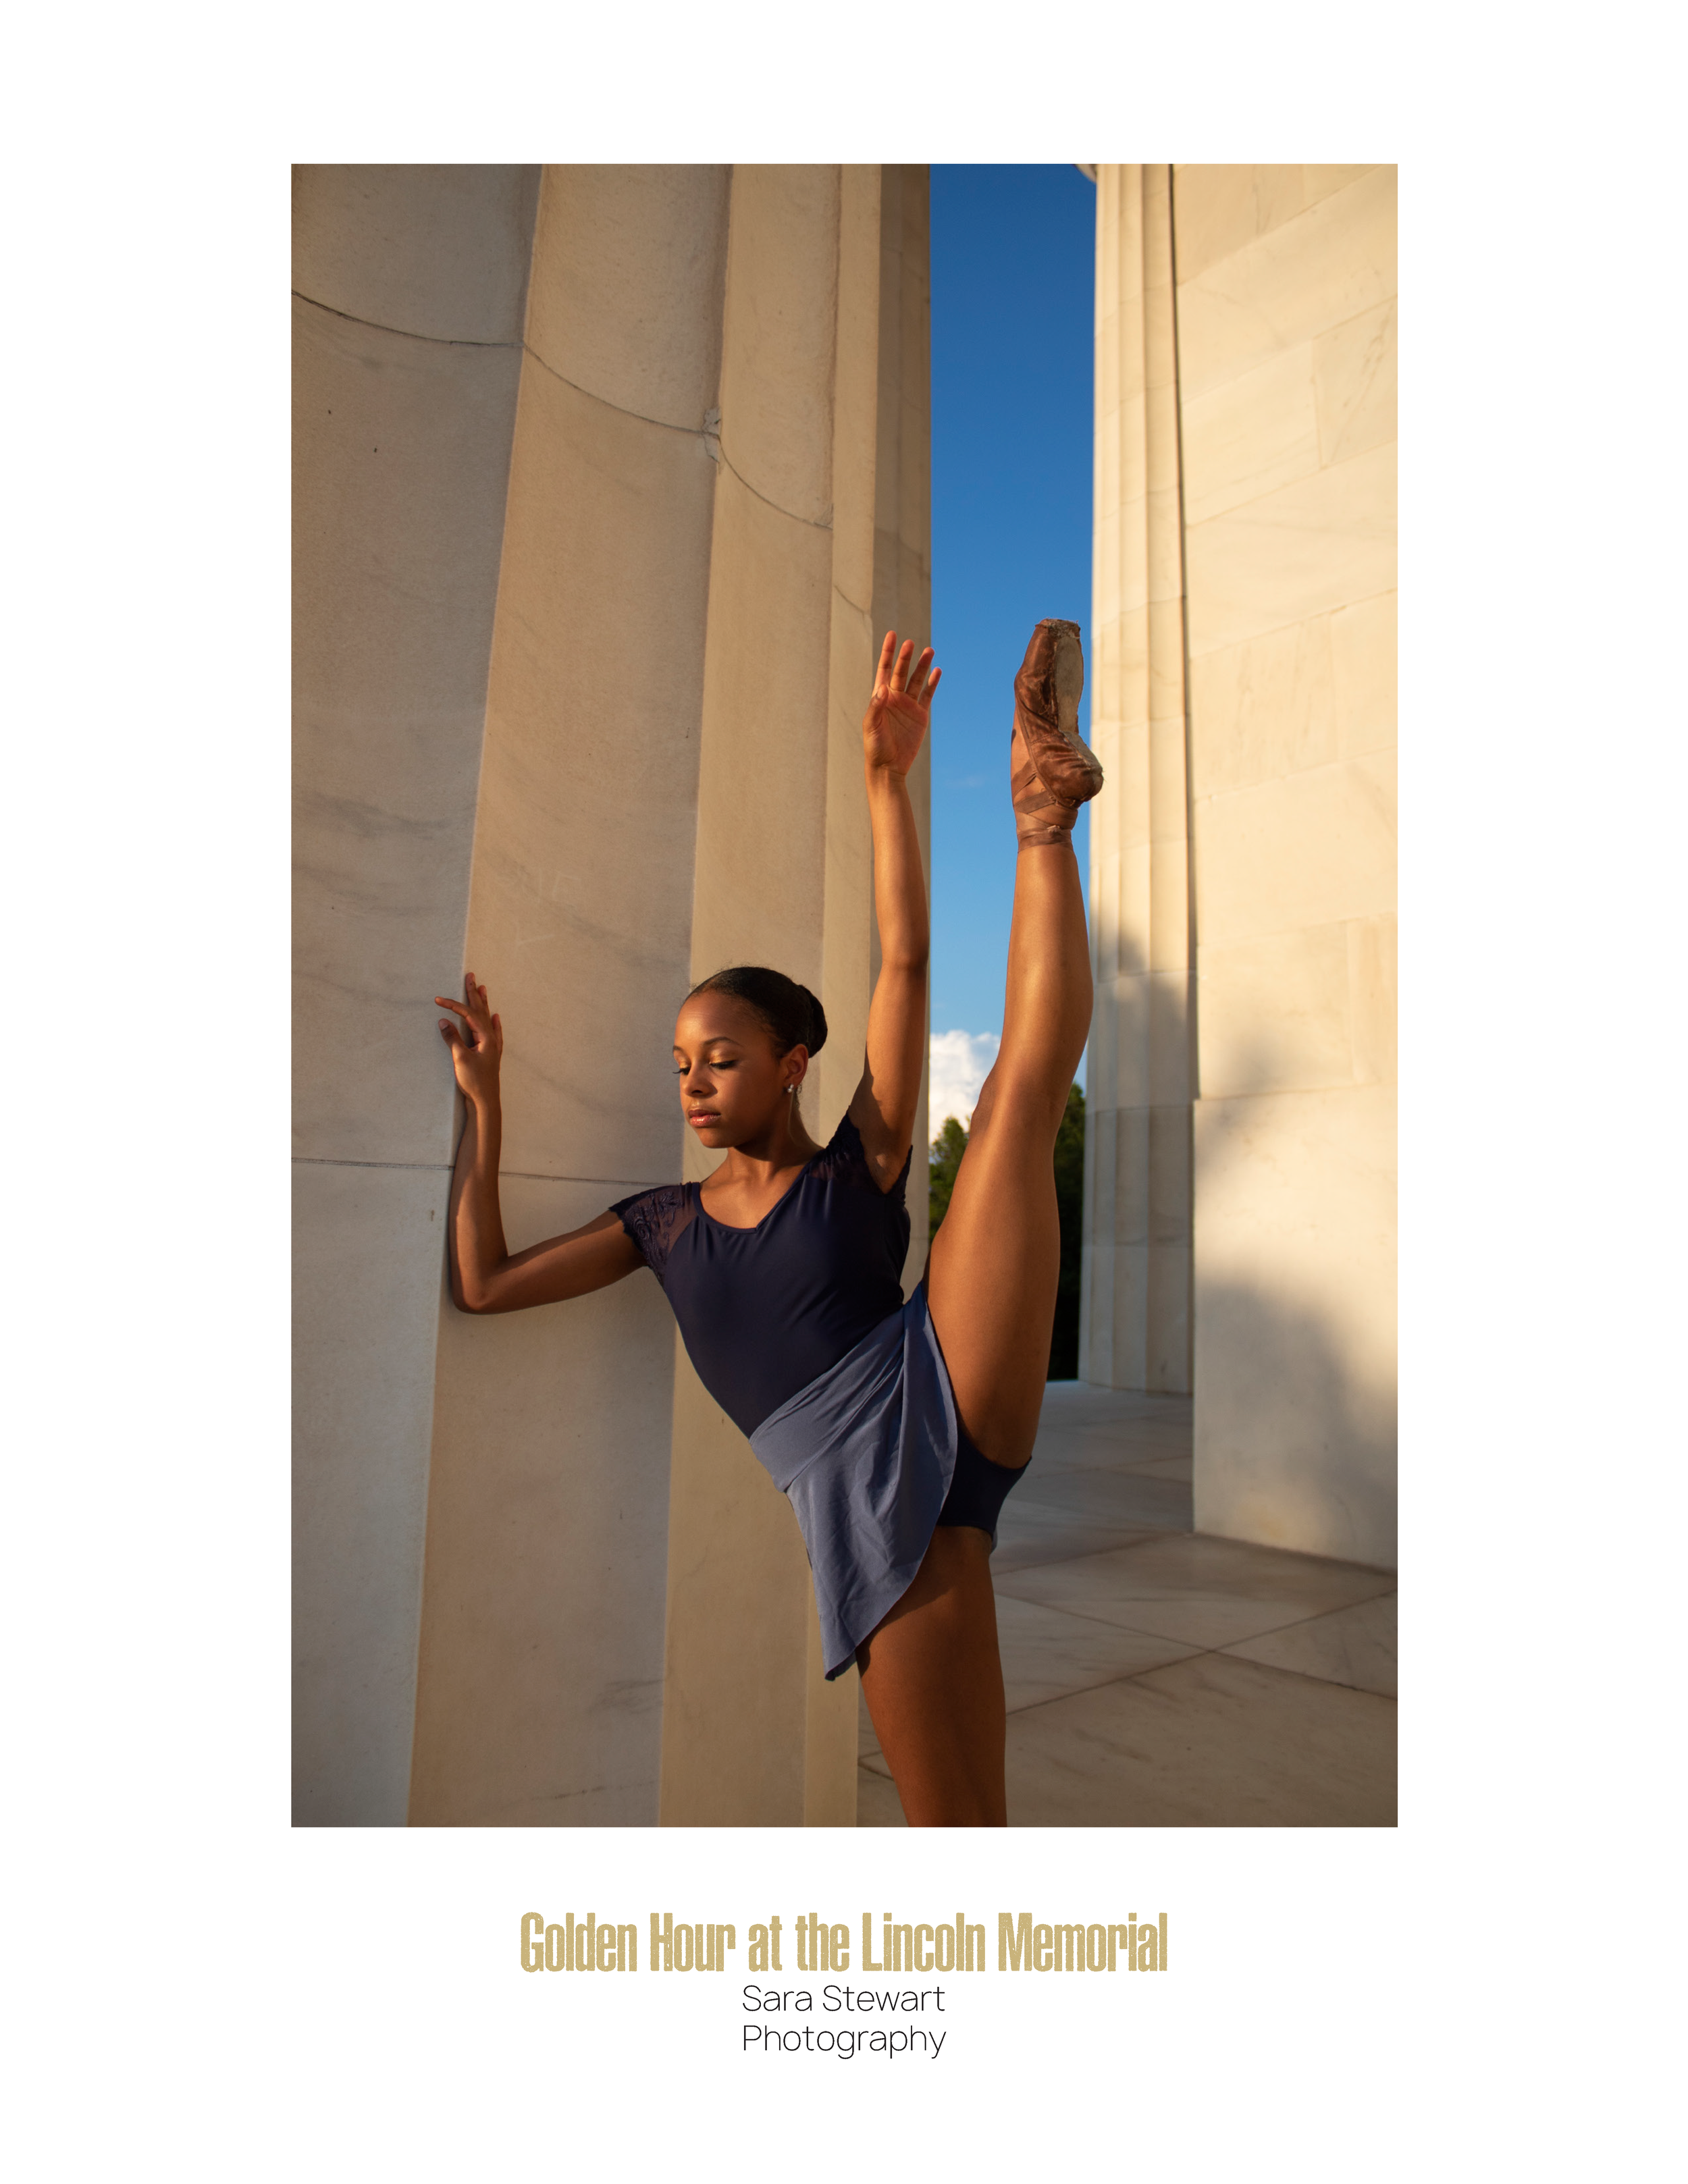 Golden Hour at the Lincoln Memorial by Sara Stewart, Photo of ballerina